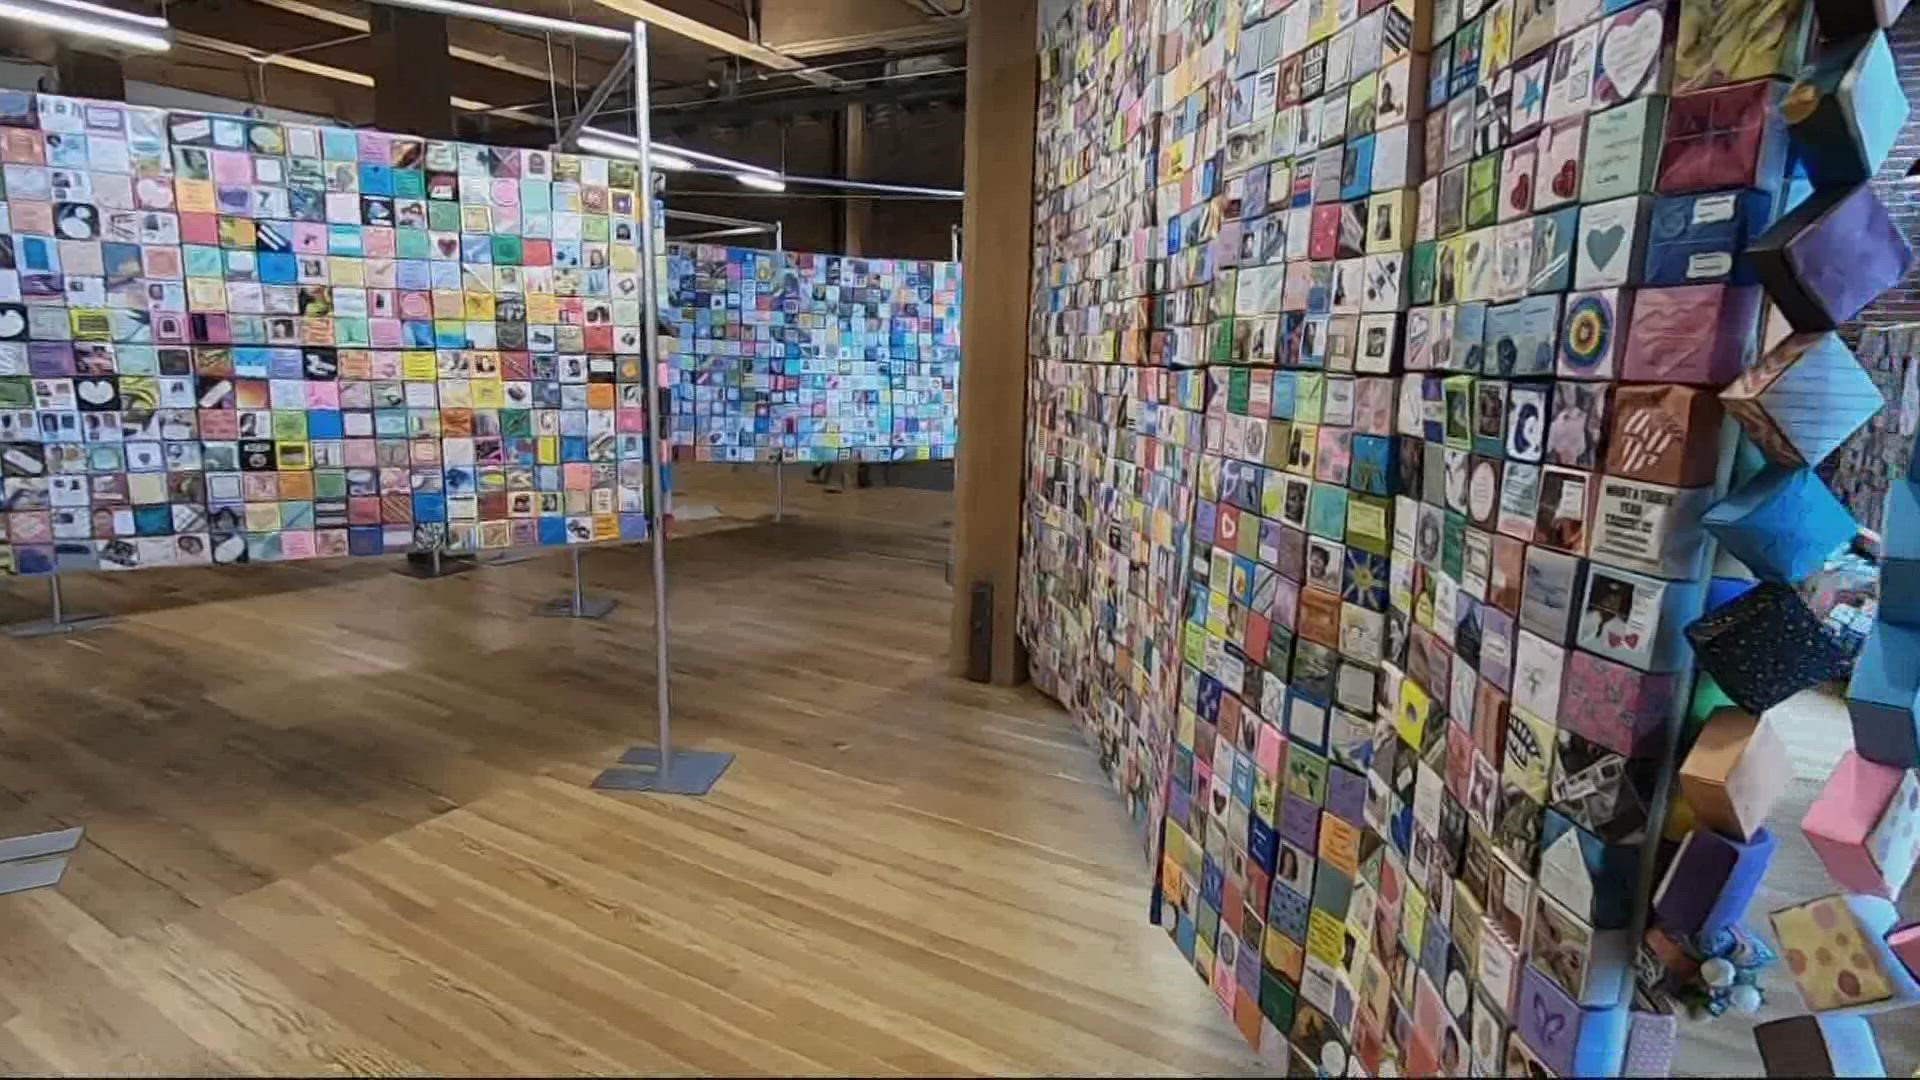 The Soul Box Project's art exhibit in Old Town features 40,000 origami boxes, each one representing a victim of gun violence in the U.S. this year.